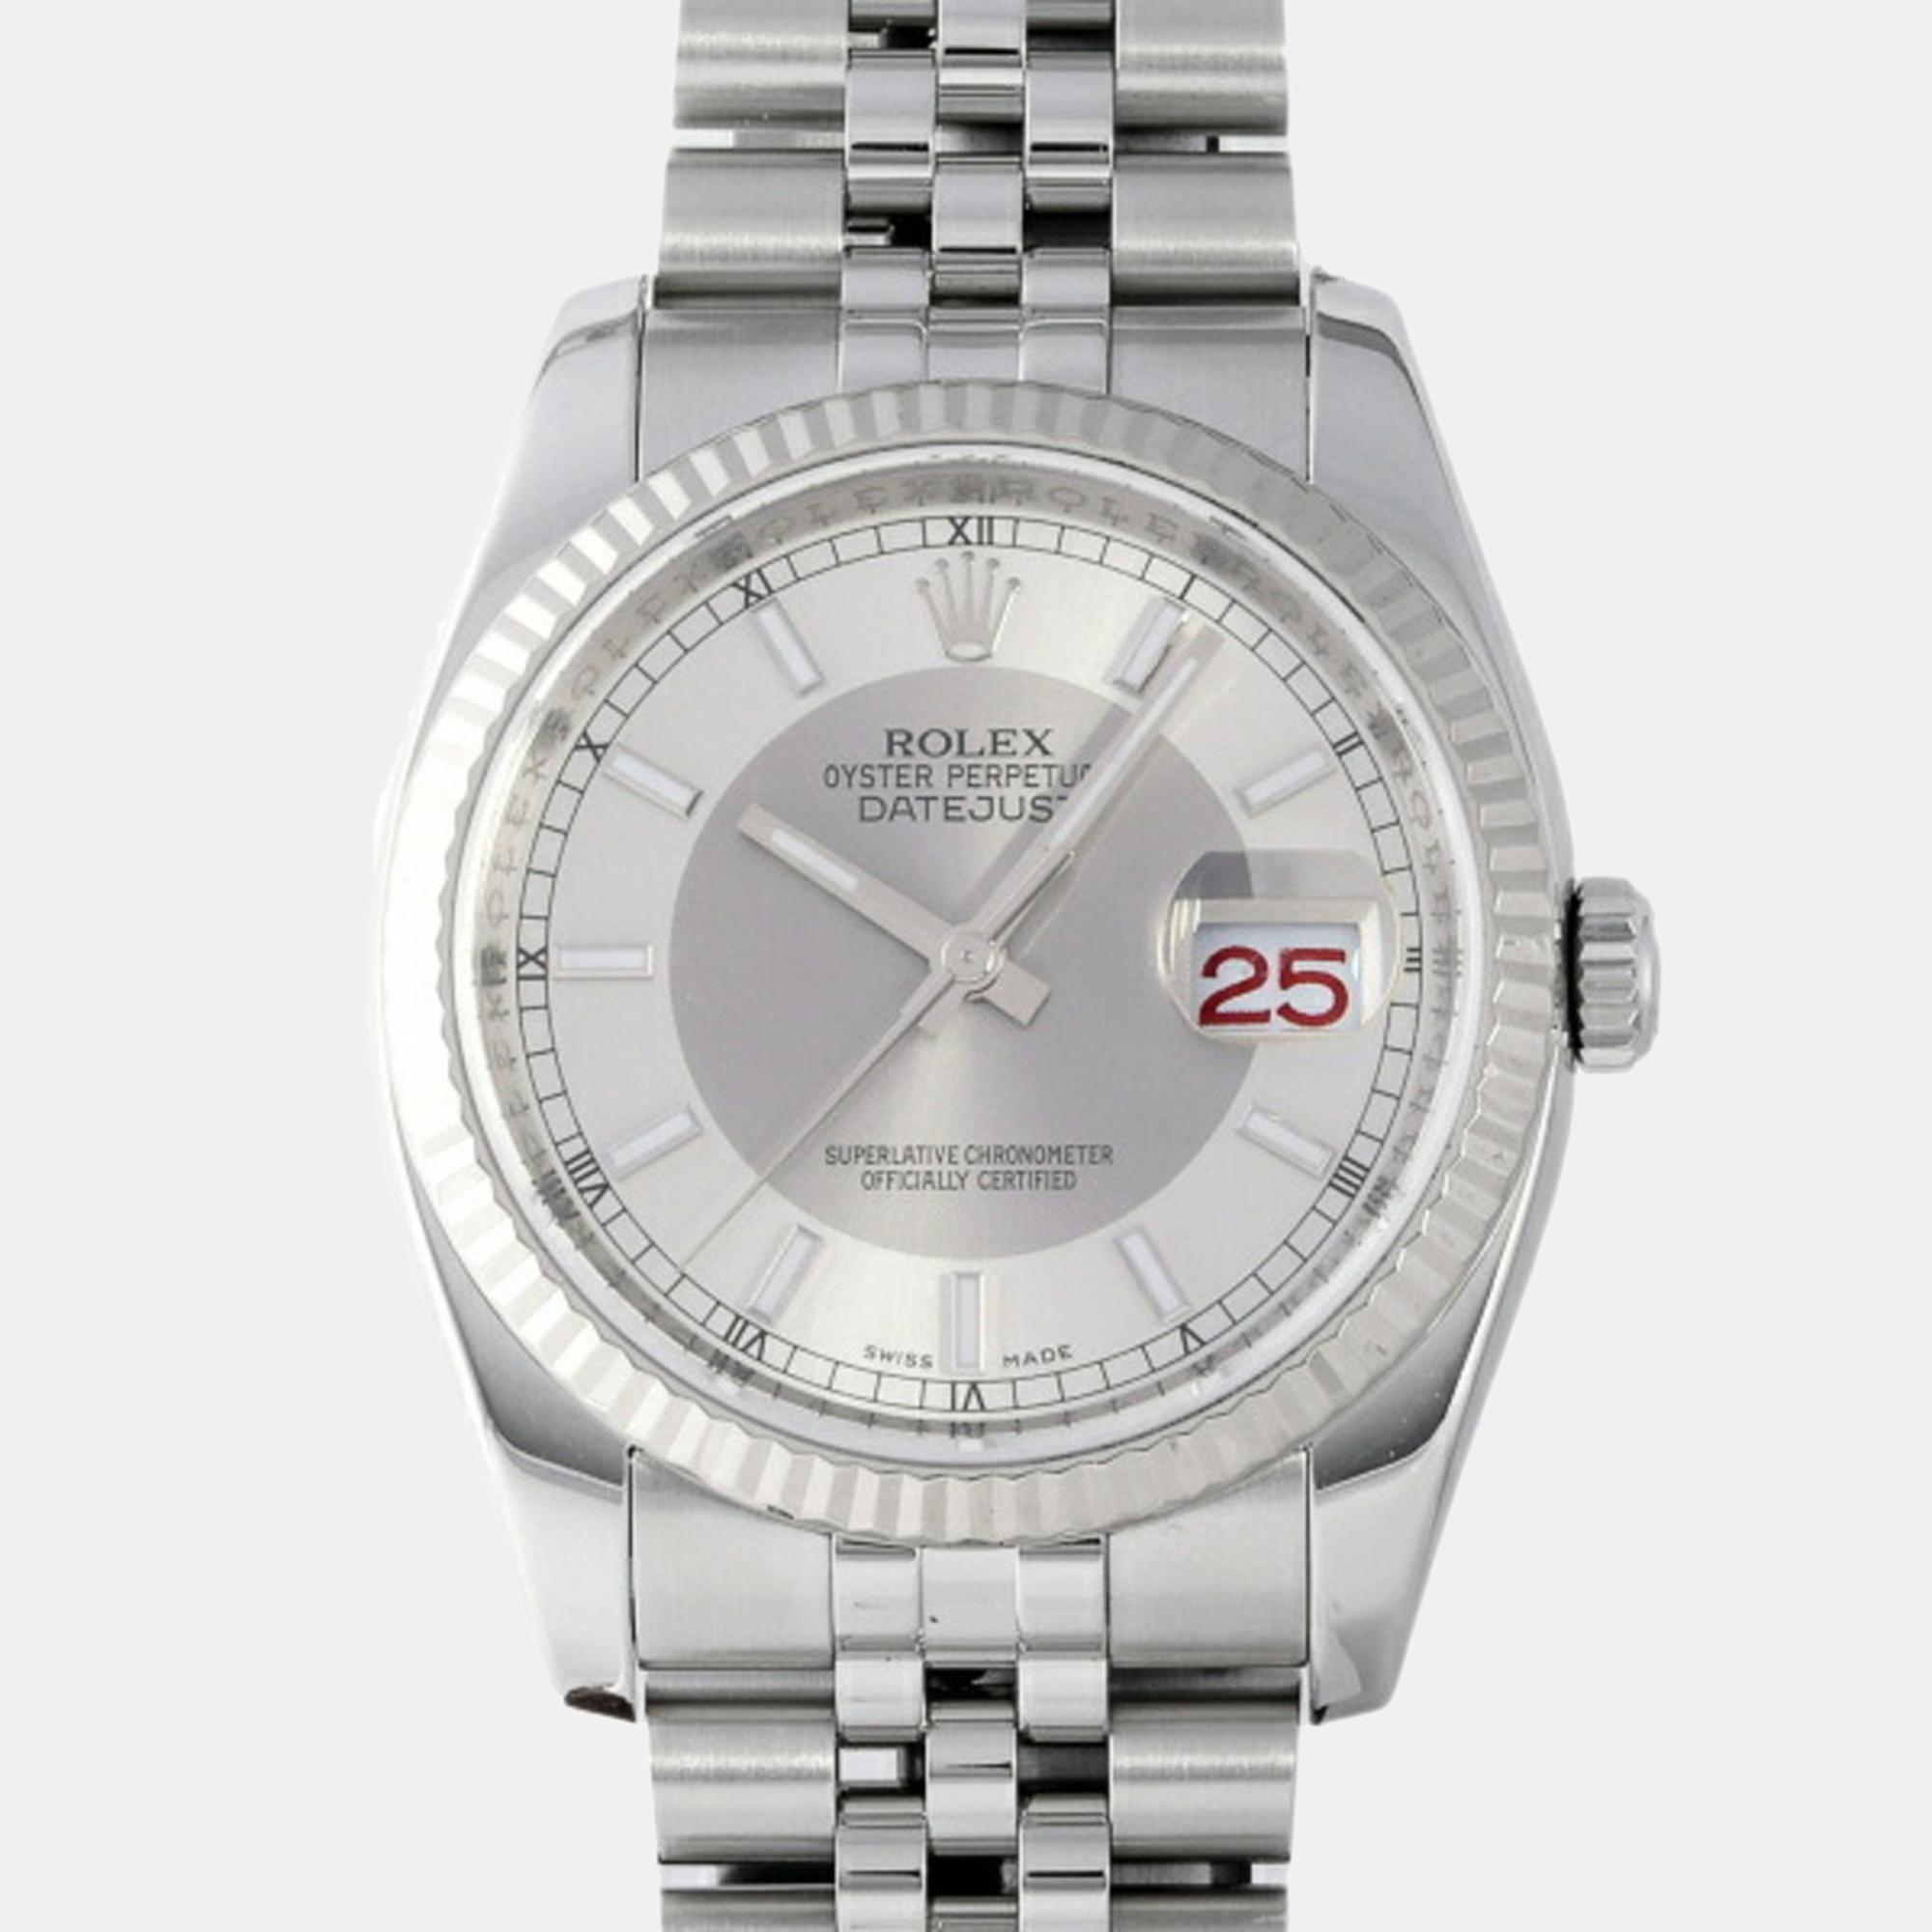 Rolex Grey 18k White Gold And Stainless Steel Datejust 116234 Automatic Men's Wristwatch 36 Mm